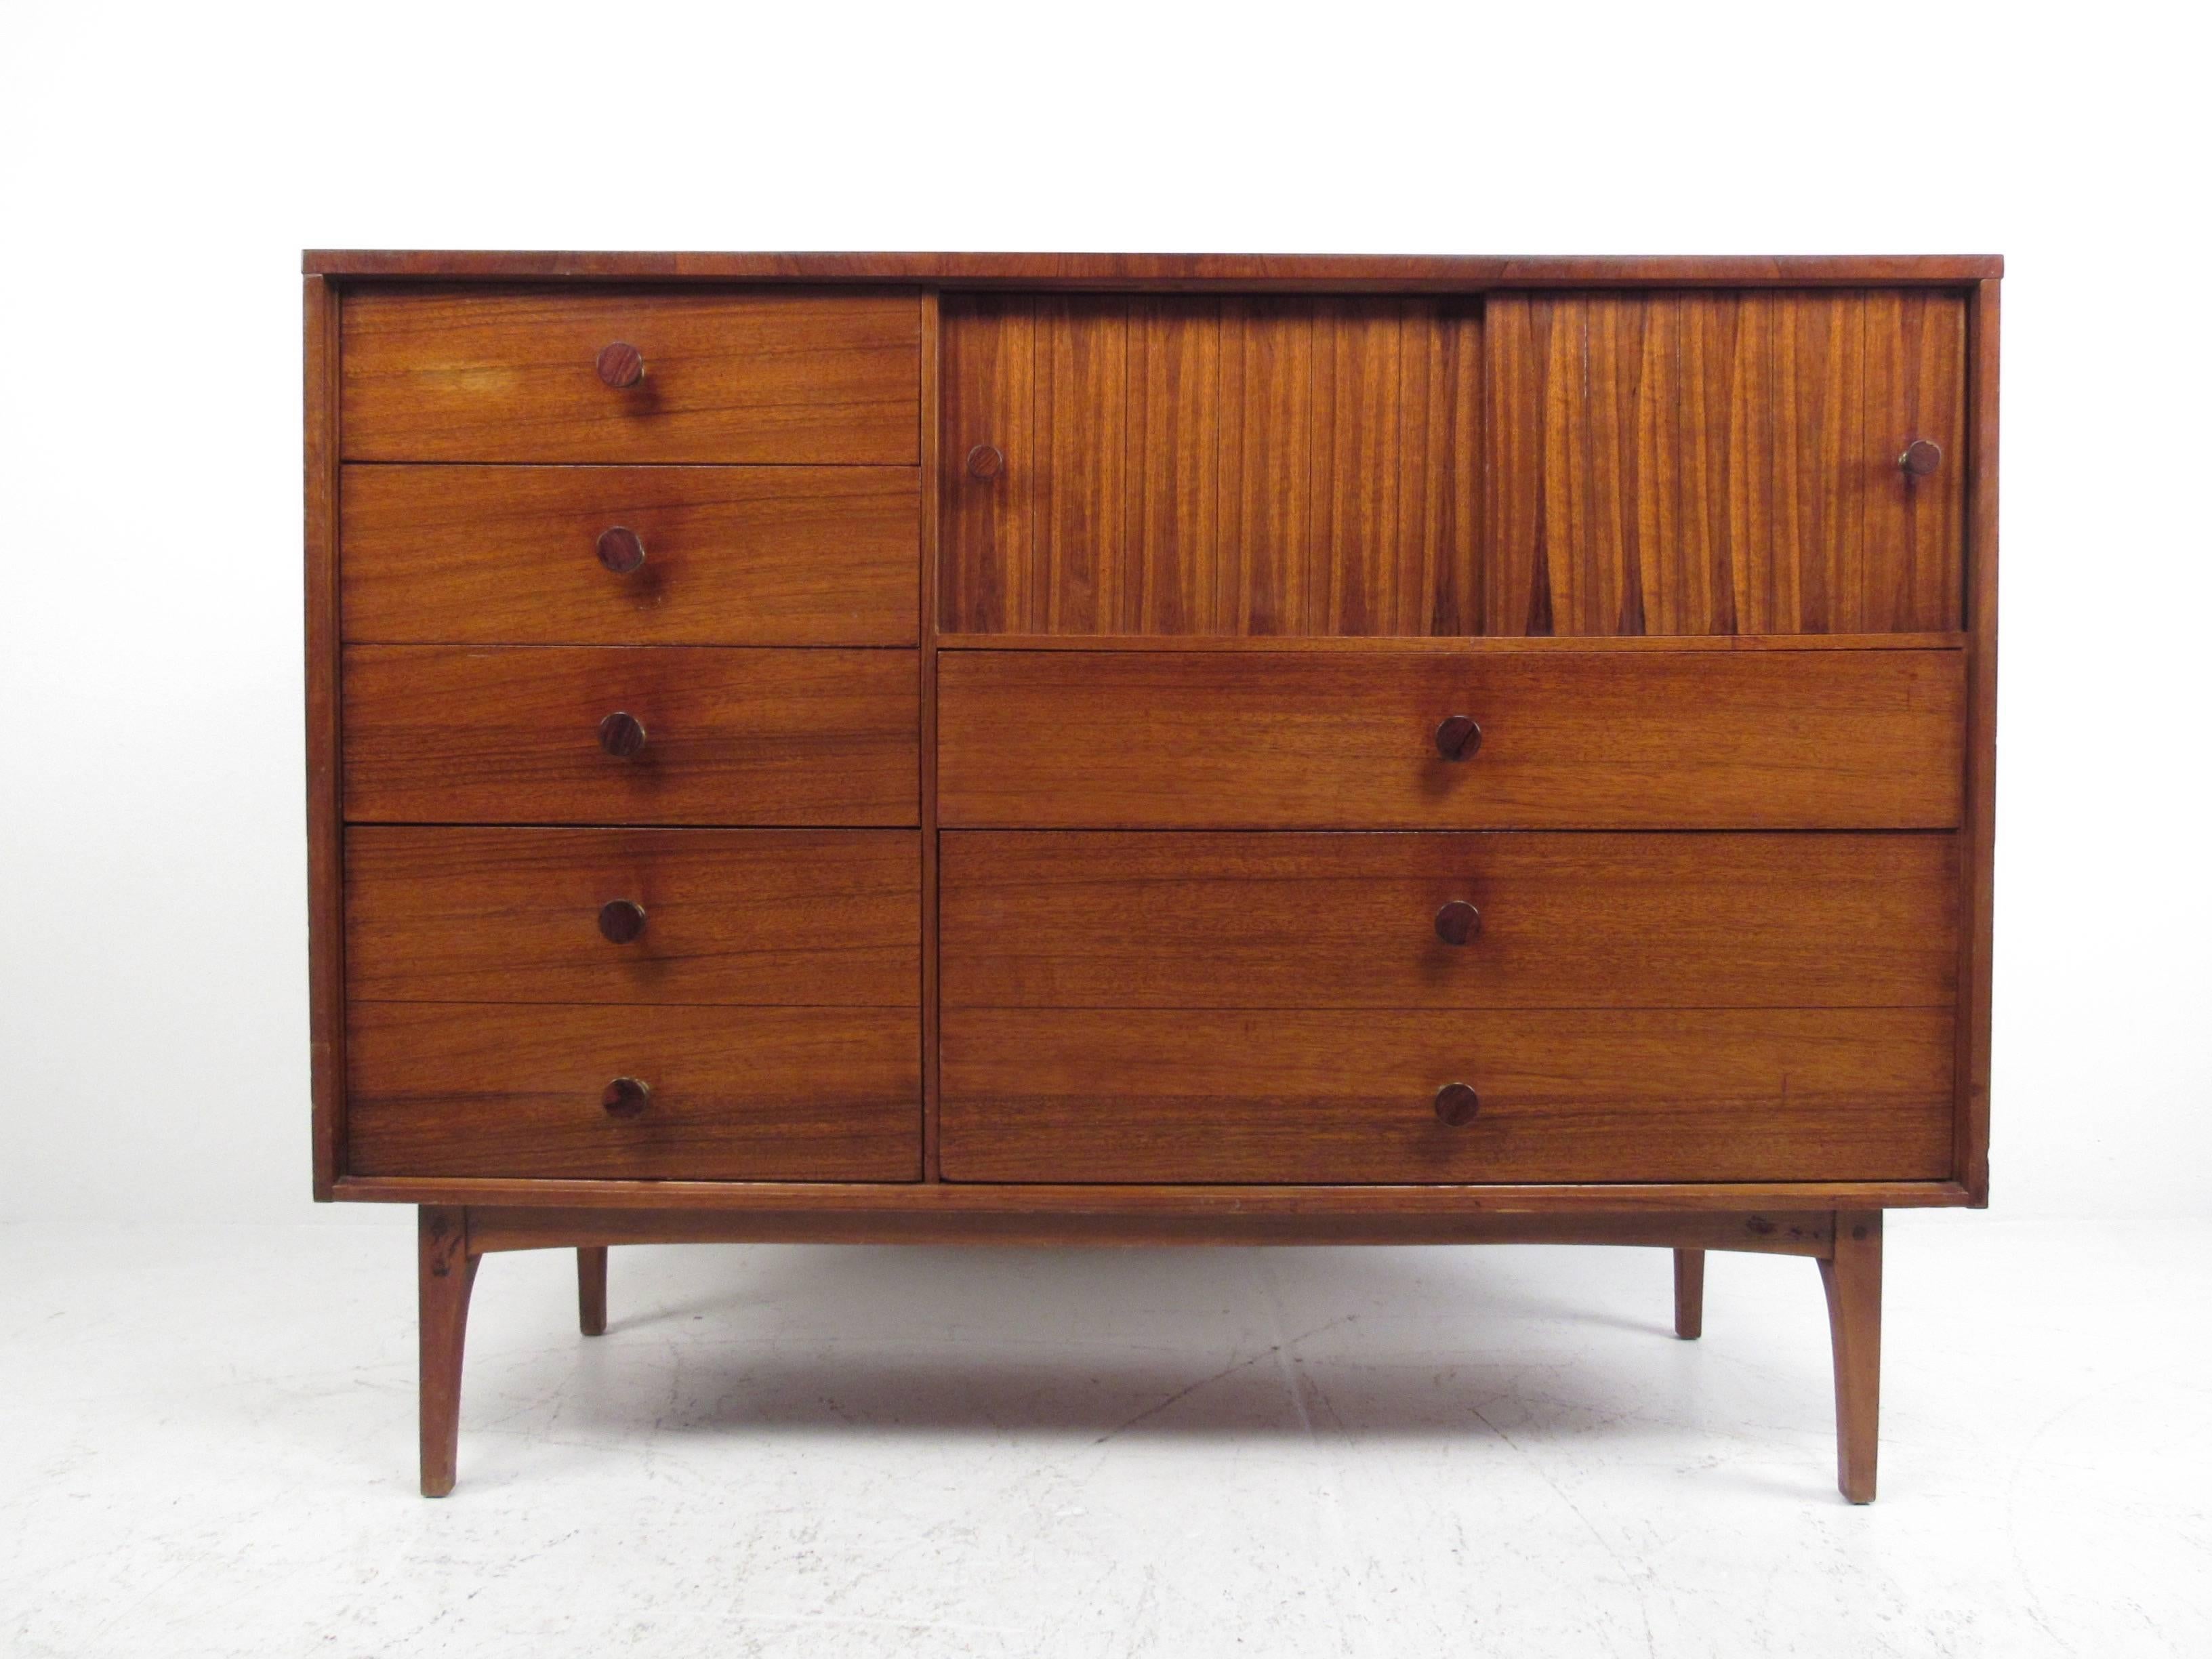 This unique vintage dresser features beautiful wood finish, with rarely seen circular brass and rosewood drawer pulls. The unique size of this Mid-Century Modern lane furniture dresser makes it a stylish and impressive storage piece or television